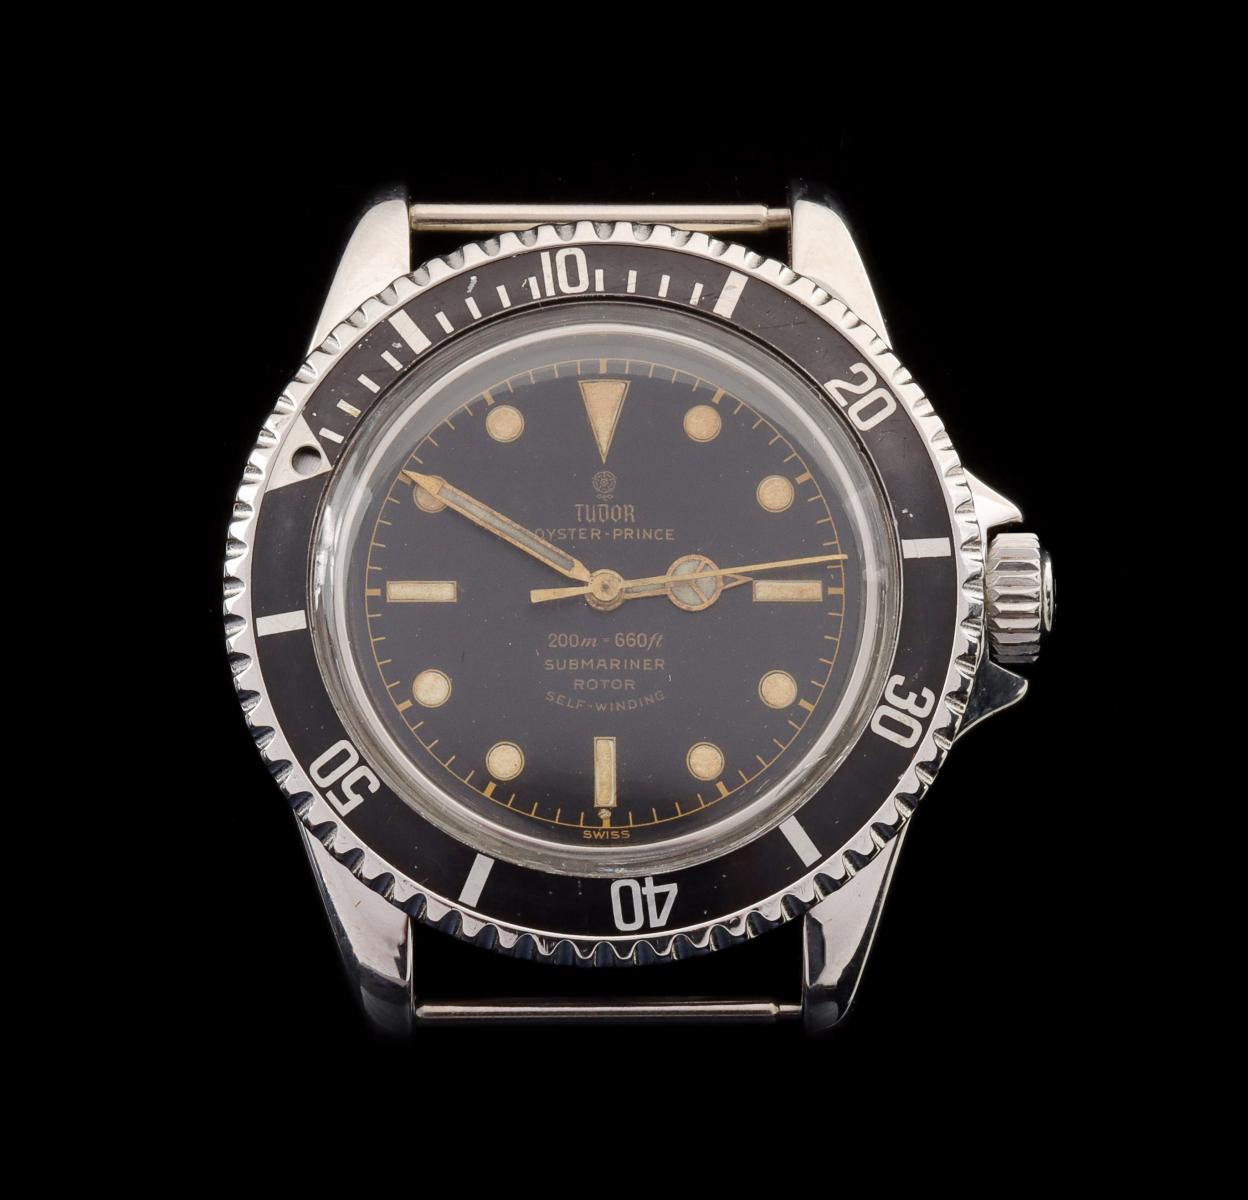 A GENT'S S/S ROLEX TUDOR OYSTER PRINCE SUBMARINER WATCH